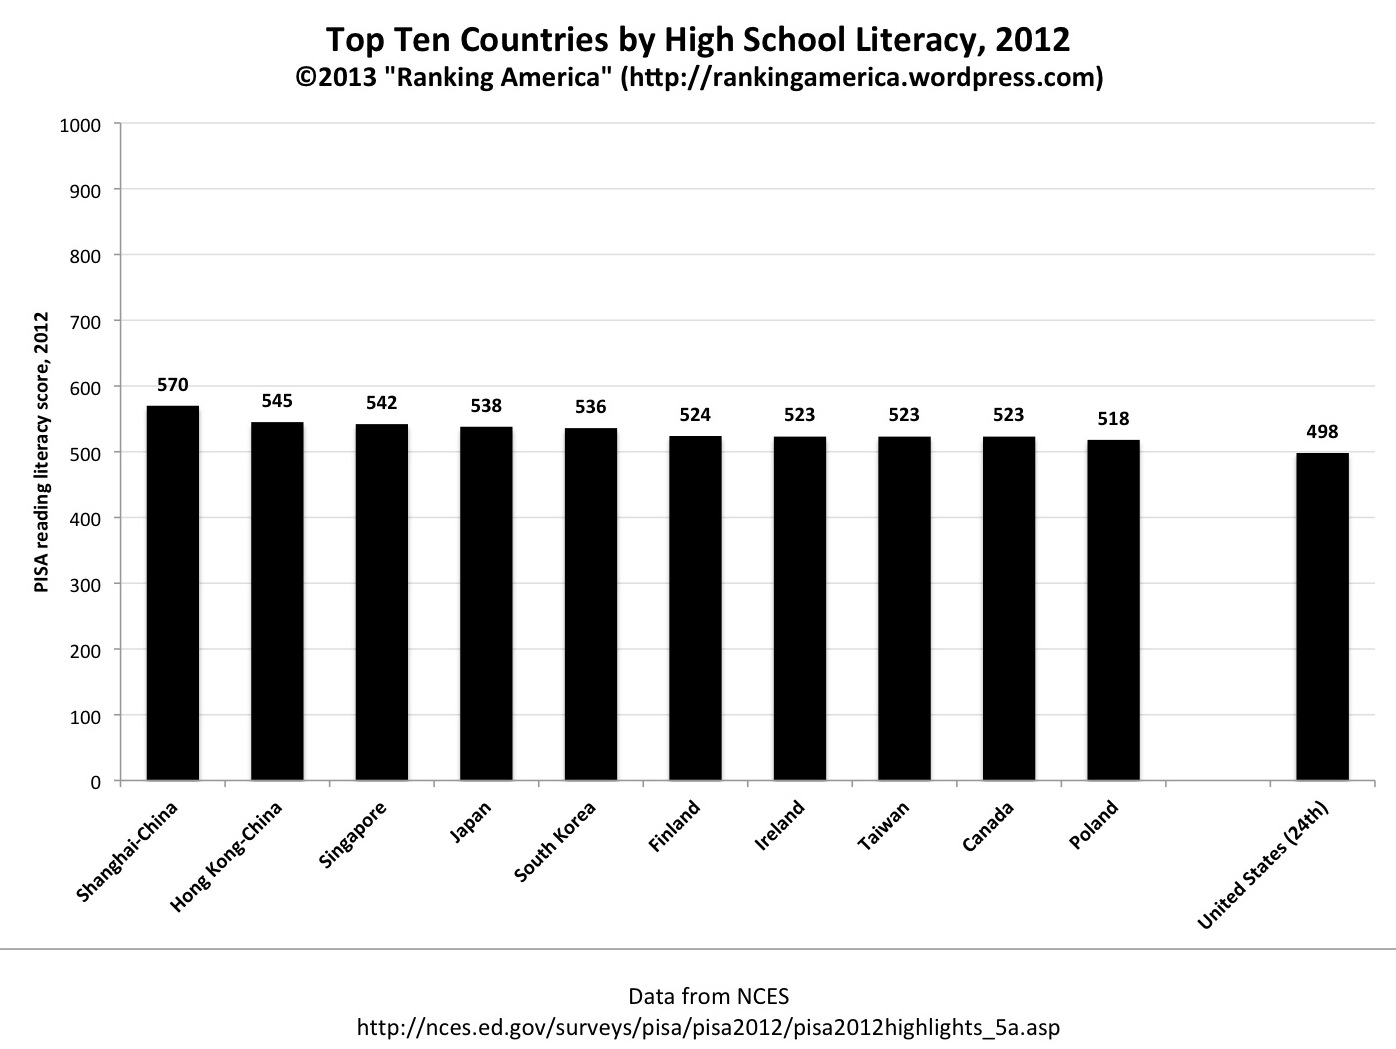 Where Does the US Rank in Education?